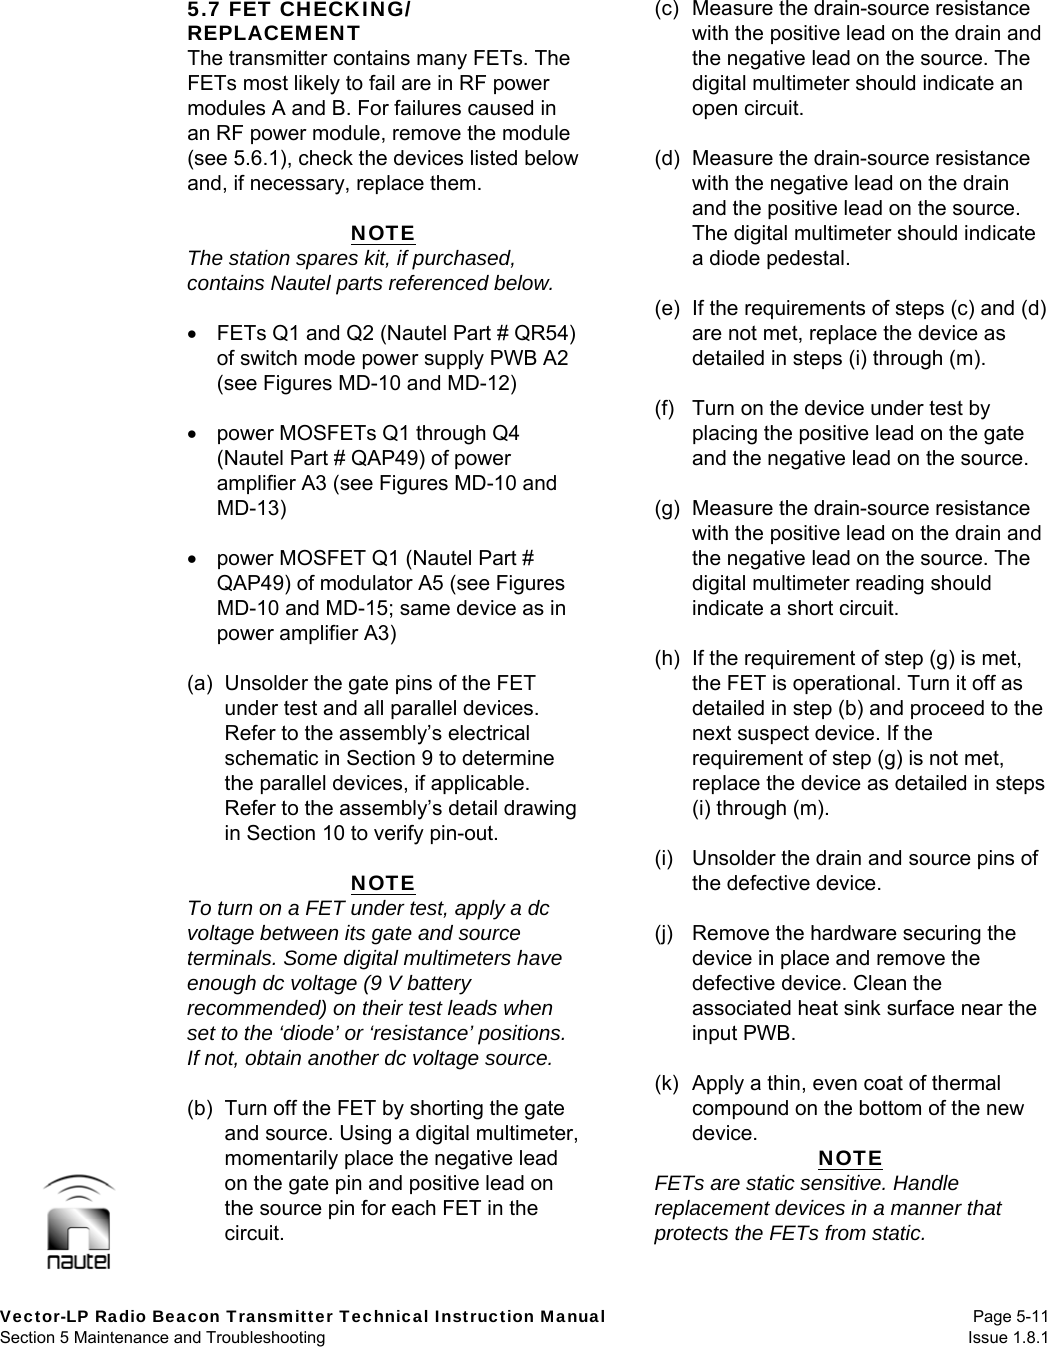   Vector-LP Radio Beacon Transmitter Technical Instruction Manual Page 5-11 Section 5 Maintenance and Troubleshooting  Issue 1.8.1 5.7 FET CHECKING/ REPLACEMENT The transmitter contains many FETs. The FETs most likely to fail are in RF power modules A and B. For failures caused in an RF power module, remove the module (see 5.6.1), check the devices listed below and, if necessary, replace them.  NOTE The station spares kit, if purchased, contains Nautel parts referenced below.    FETs Q1 and Q2 (Nautel Part # QR54) of switch mode power supply PWB A2 (see Figures MD-10 and MD-12)    power MOSFETs Q1 through Q4 (Nautel Part # QAP49) of power amplifier A3 (see Figures MD-10 and MD-13)    power MOSFET Q1 (Nautel Part # QAP49) of modulator A5 (see Figures MD-10 and MD-15; same device as in power amplifier A3)  (a)  Unsolder the gate pins of the FET under test and all parallel devices. Refer to the assembly’s electrical schematic in Section 9 to determine the parallel devices, if applicable. Refer to the assembly’s detail drawing in Section 10 to verify pin-out.  NOTE To turn on a FET under test, apply a dc voltage between its gate and source terminals. Some digital multimeters have enough dc voltage (9 V battery recommended) on their test leads when set to the ‘diode’ or ‘resistance’ positions. If not, obtain another dc voltage source.  (b)  Turn off the FET by shorting the gate and source. Using a digital multimeter, momentarily place the negative lead on the gate pin and positive lead on the source pin for each FET in the circuit.  (c)  Measure the drain-source resistance with the positive lead on the drain and the negative lead on the source. The digital multimeter should indicate an open circuit.  (d)  Measure the drain-source resistance with the negative lead on the drain and the positive lead on the source. The digital multimeter should indicate a diode pedestal.  (e)  If the requirements of steps (c) and (d) are not met, replace the device as detailed in steps (i) through (m).  (f)  Turn on the device under test by placing the positive lead on the gate and the negative lead on the source.  (g)  Measure the drain-source resistance with the positive lead on the drain and the negative lead on the source. The digital multimeter reading should indicate a short circuit.  (h)  If the requirement of step (g) is met, the FET is operational. Turn it off as detailed in step (b) and proceed to the next suspect device. If the requirement of step (g) is not met, replace the device as detailed in steps (i) through (m).  (i)  Unsolder the drain and source pins of the defective device.  (j)  Remove the hardware securing the device in place and remove the defective device. Clean the associated heat sink surface near the input PWB.  (k)  Apply a thin, even coat of thermal compound on the bottom of the new device.  NOTE FETs are static sensitive. Handle replacement devices in a manner that protects the FETs from static.  